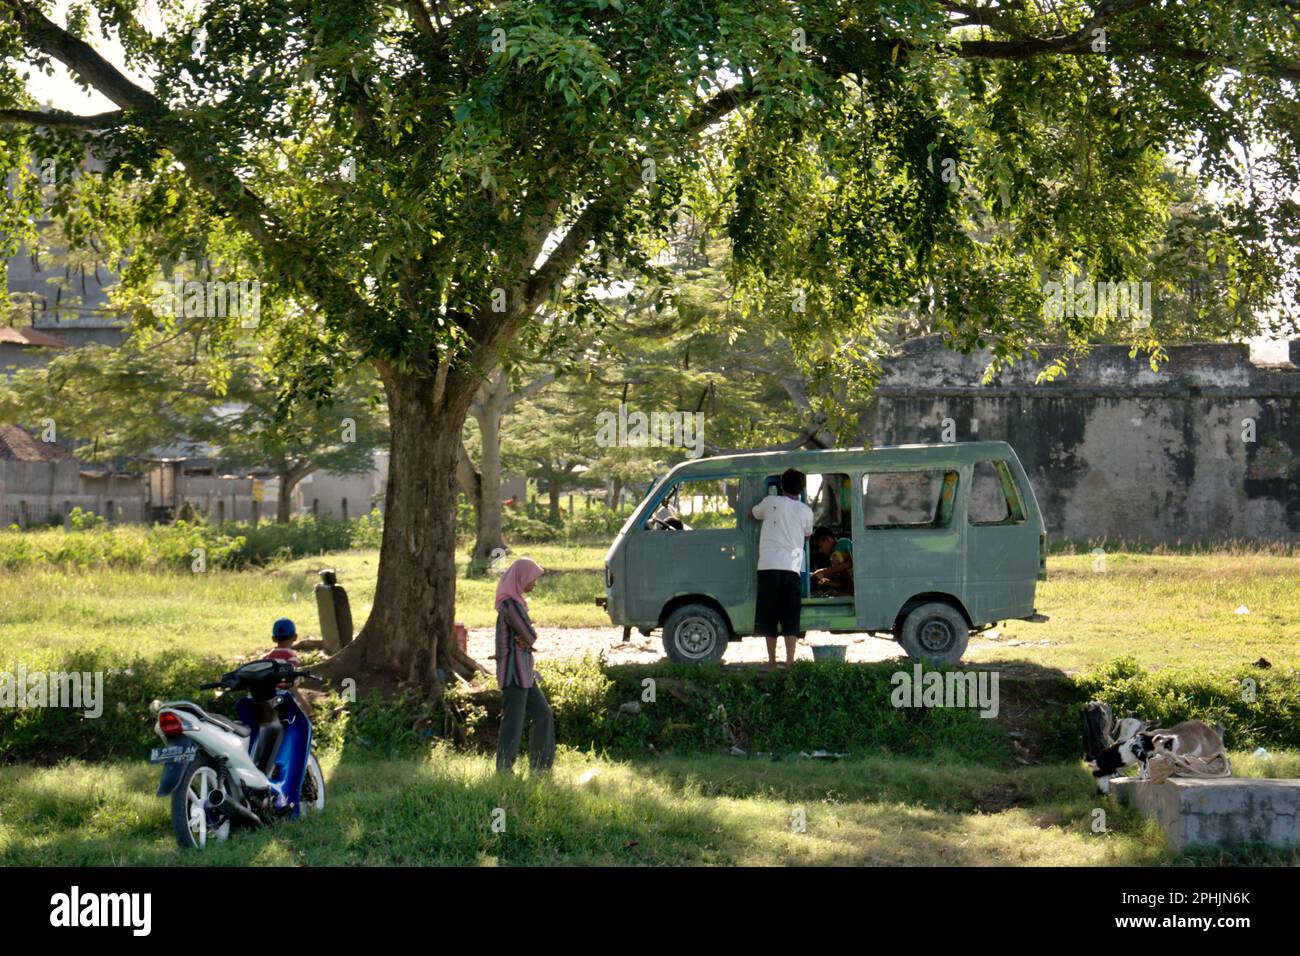 A motorcycle and a minibus are parked by visitors near Fort Speelwijk, one of the cultural heritage objects in area now called Banten Lama (Old Banten) in Serang, Banten, Indonesia, on this photo taken in 2010. 'The sustainability of cultural heritage is strongly linked to the effective participation of local communities in the conservation and management of these resources,' according to a team of scientists led by Sunday Oladipo Oladeji in their research article published on Sage Journals on October 28, 2022. Banten Lama (Old Banten) area was a part of the important port of Banten Sultanate, Stock Photo